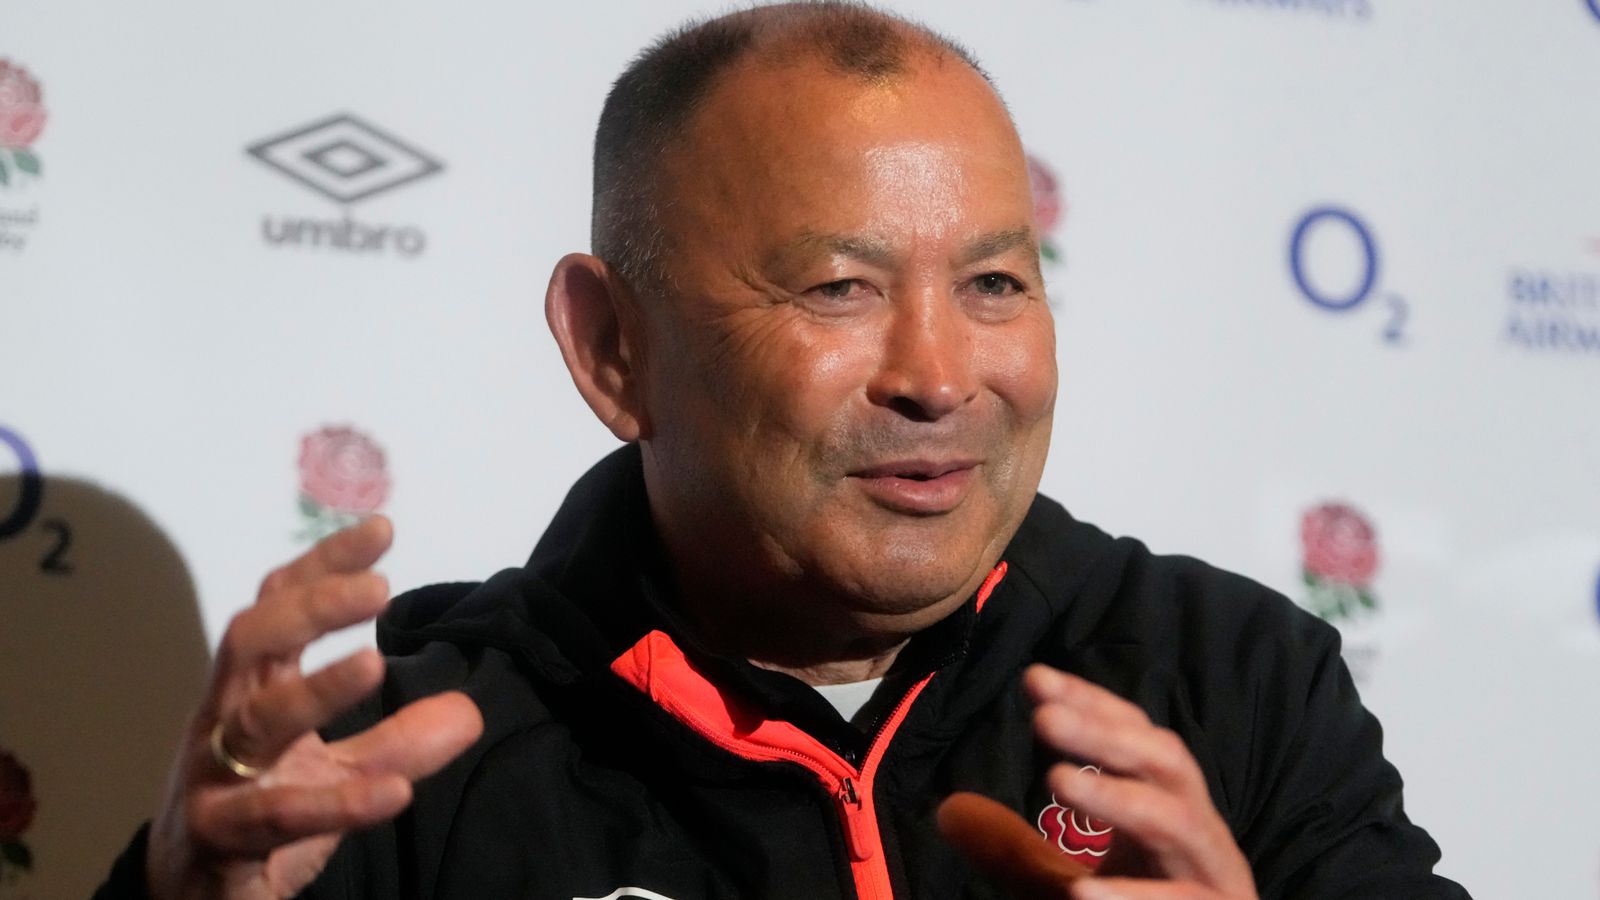 Eddie Jones becomes Australia coach: I’ll blank England hierarchy if we meet at World Cup